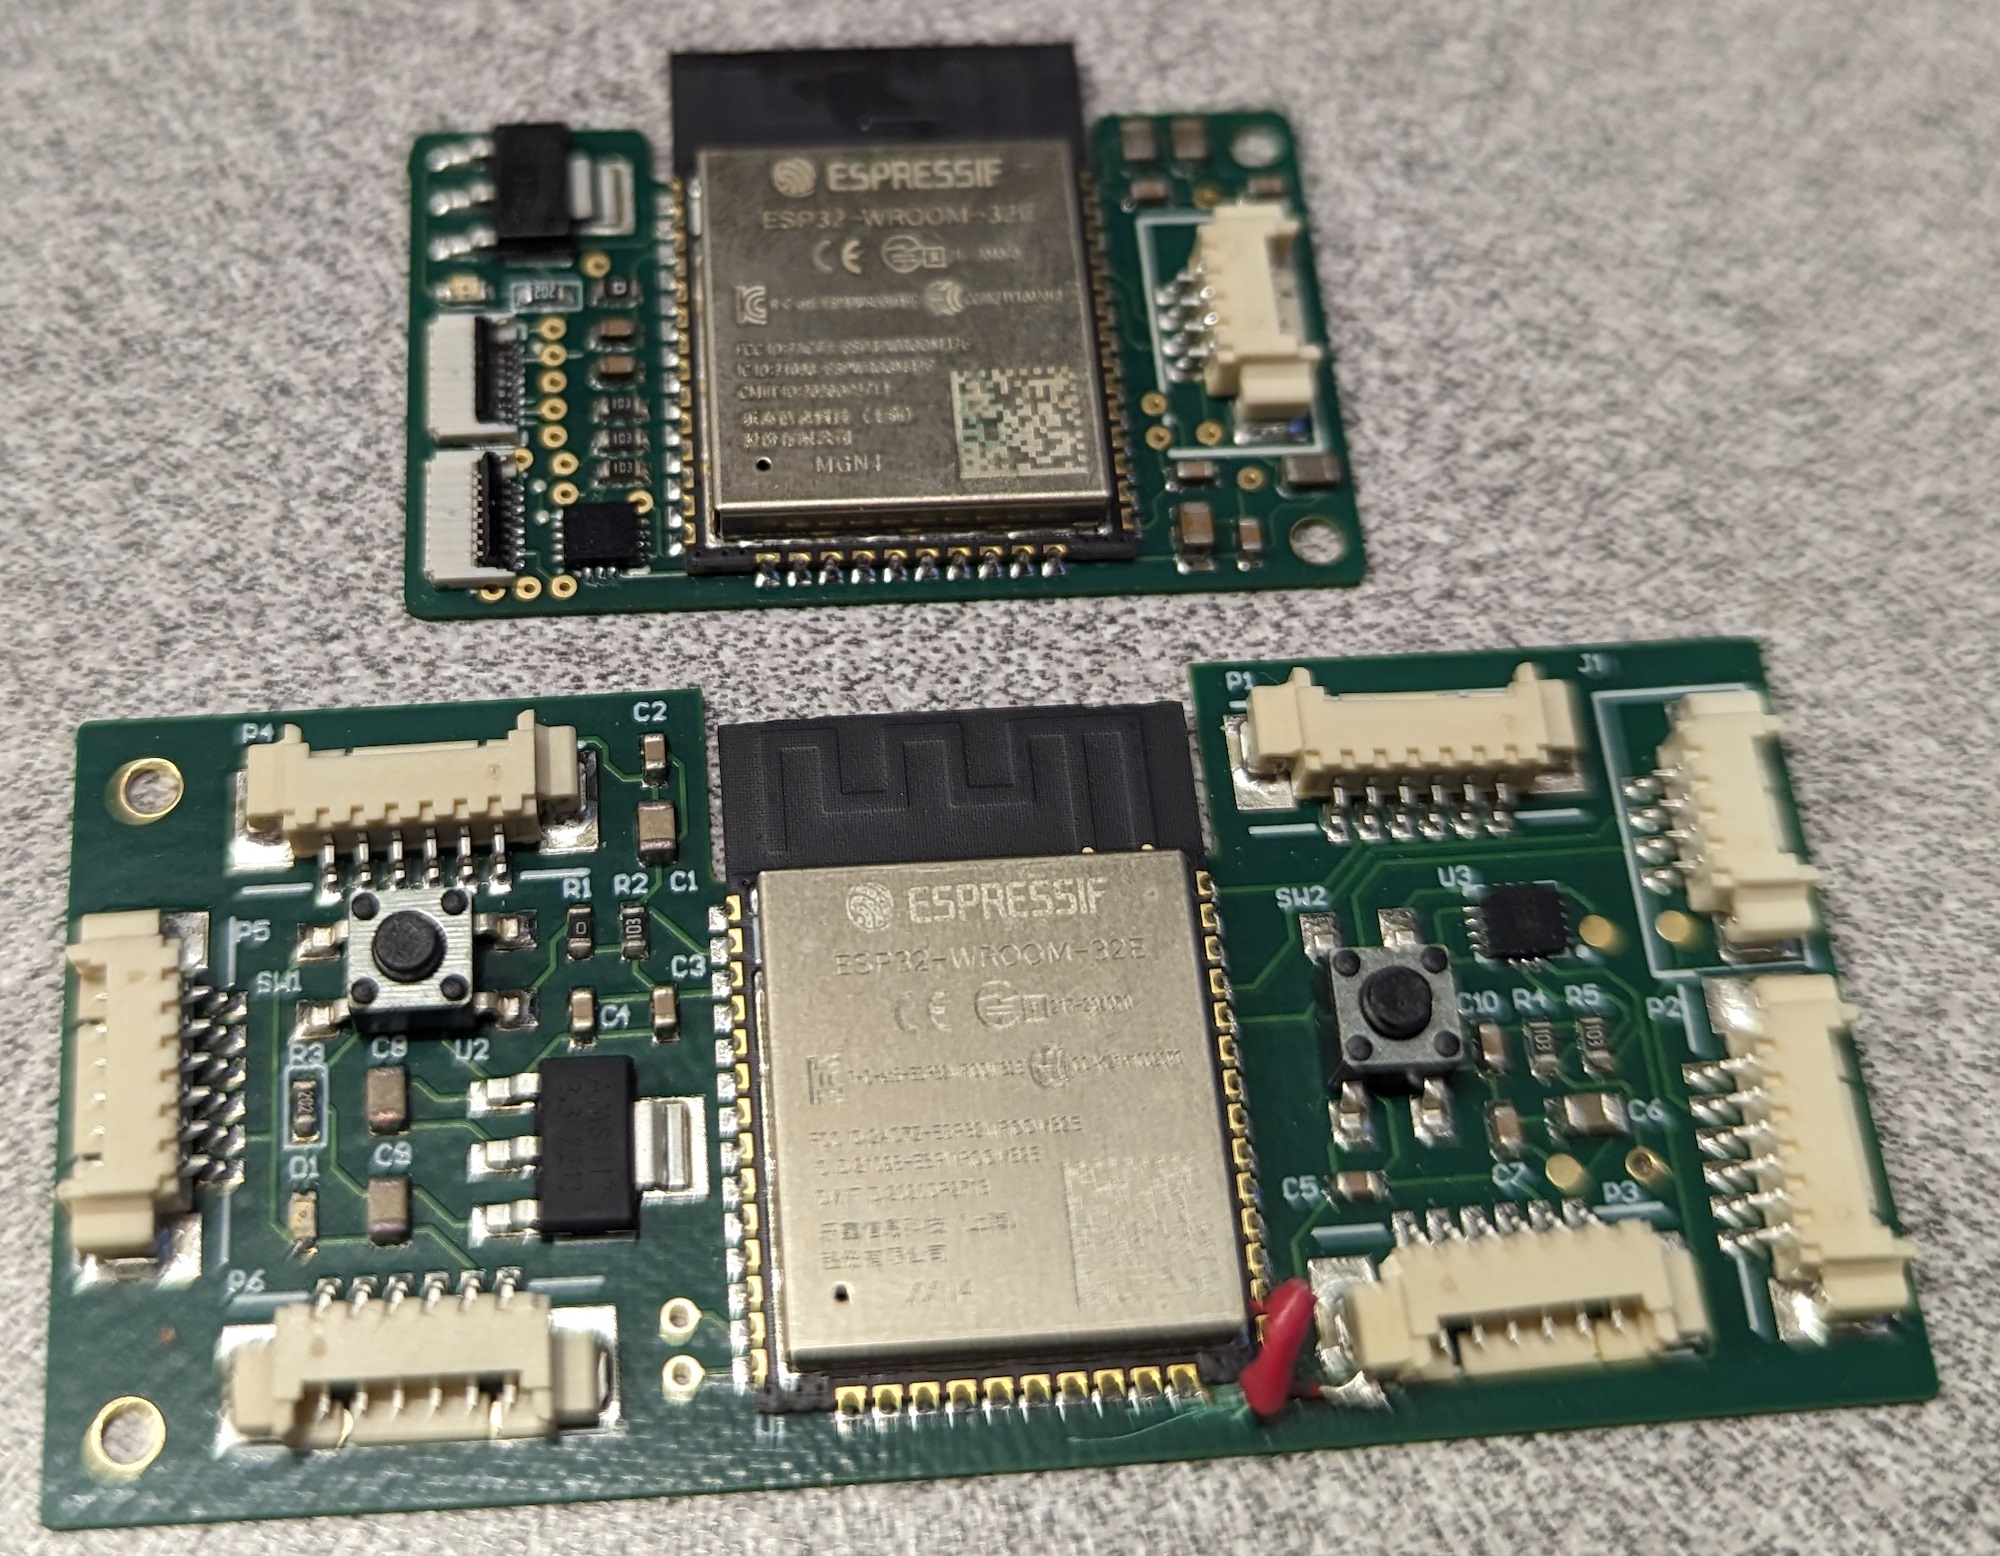 Old and new PCBs